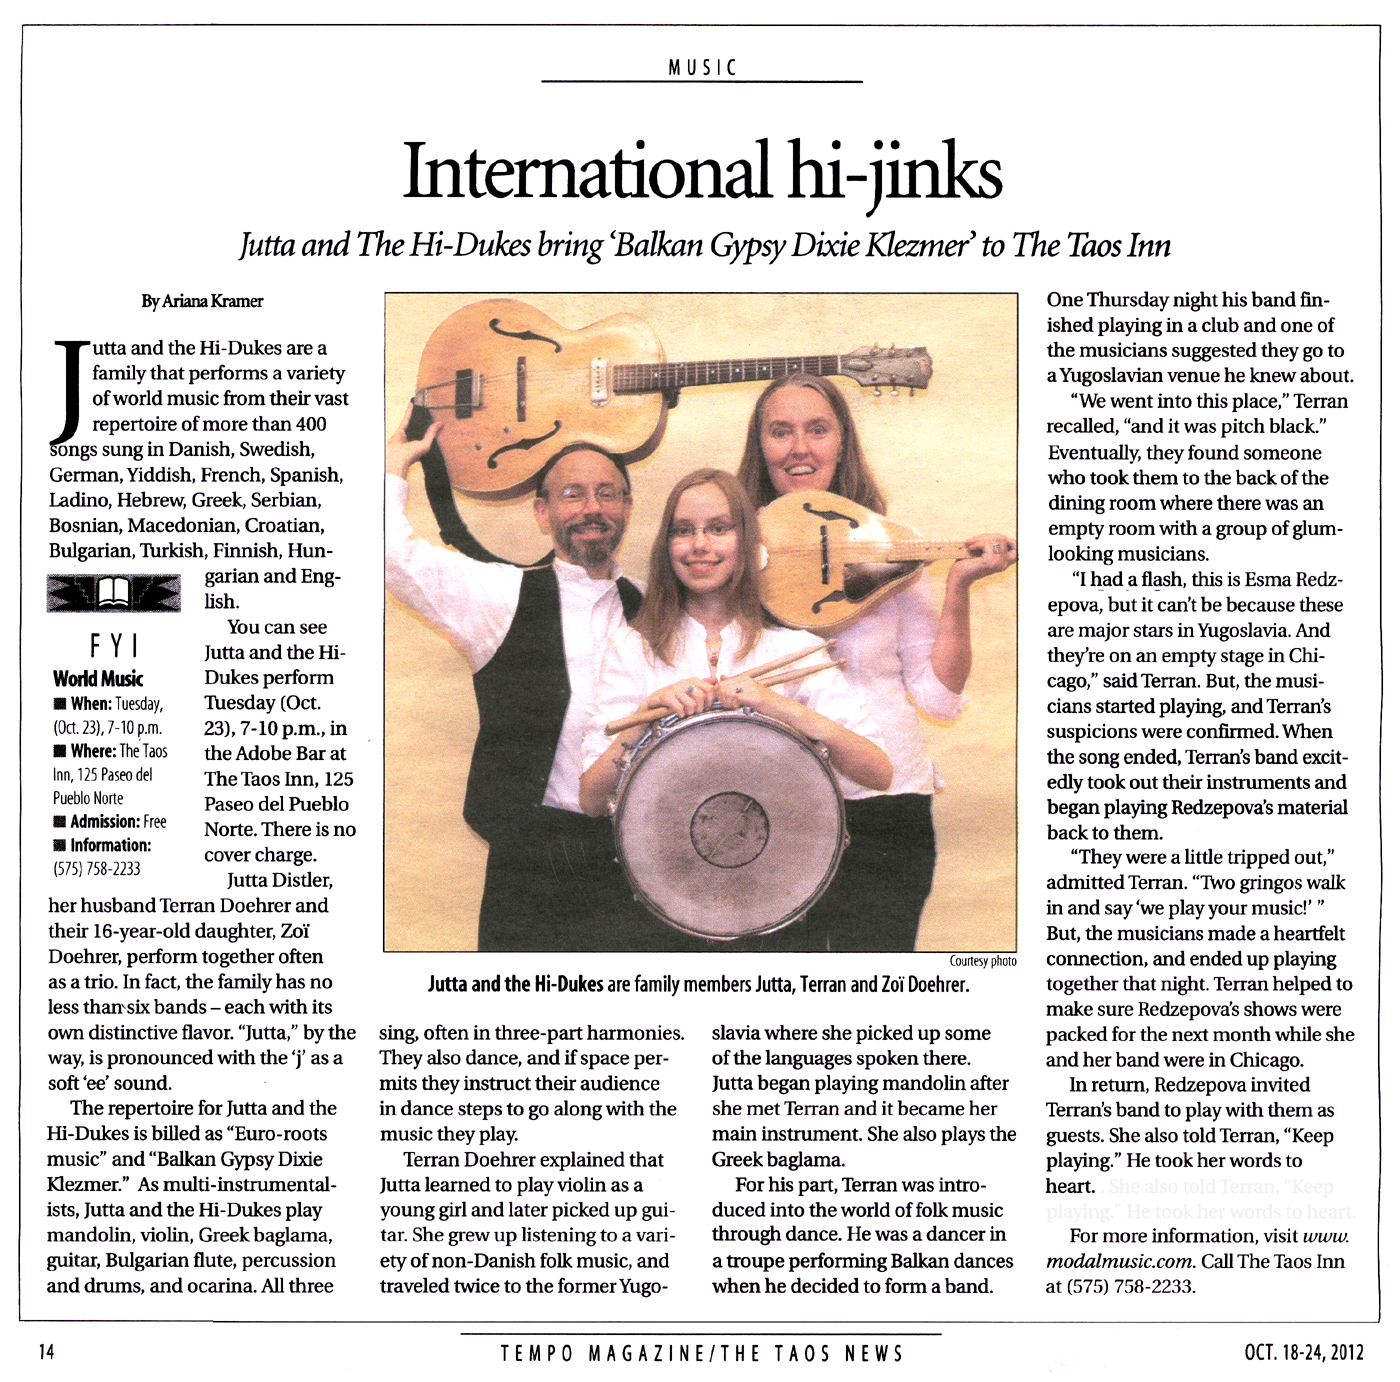 Image of article in the Taos News Tempo Magazine October 18, 2012 clipping about Jutta & the Hi-Dukes (tm)